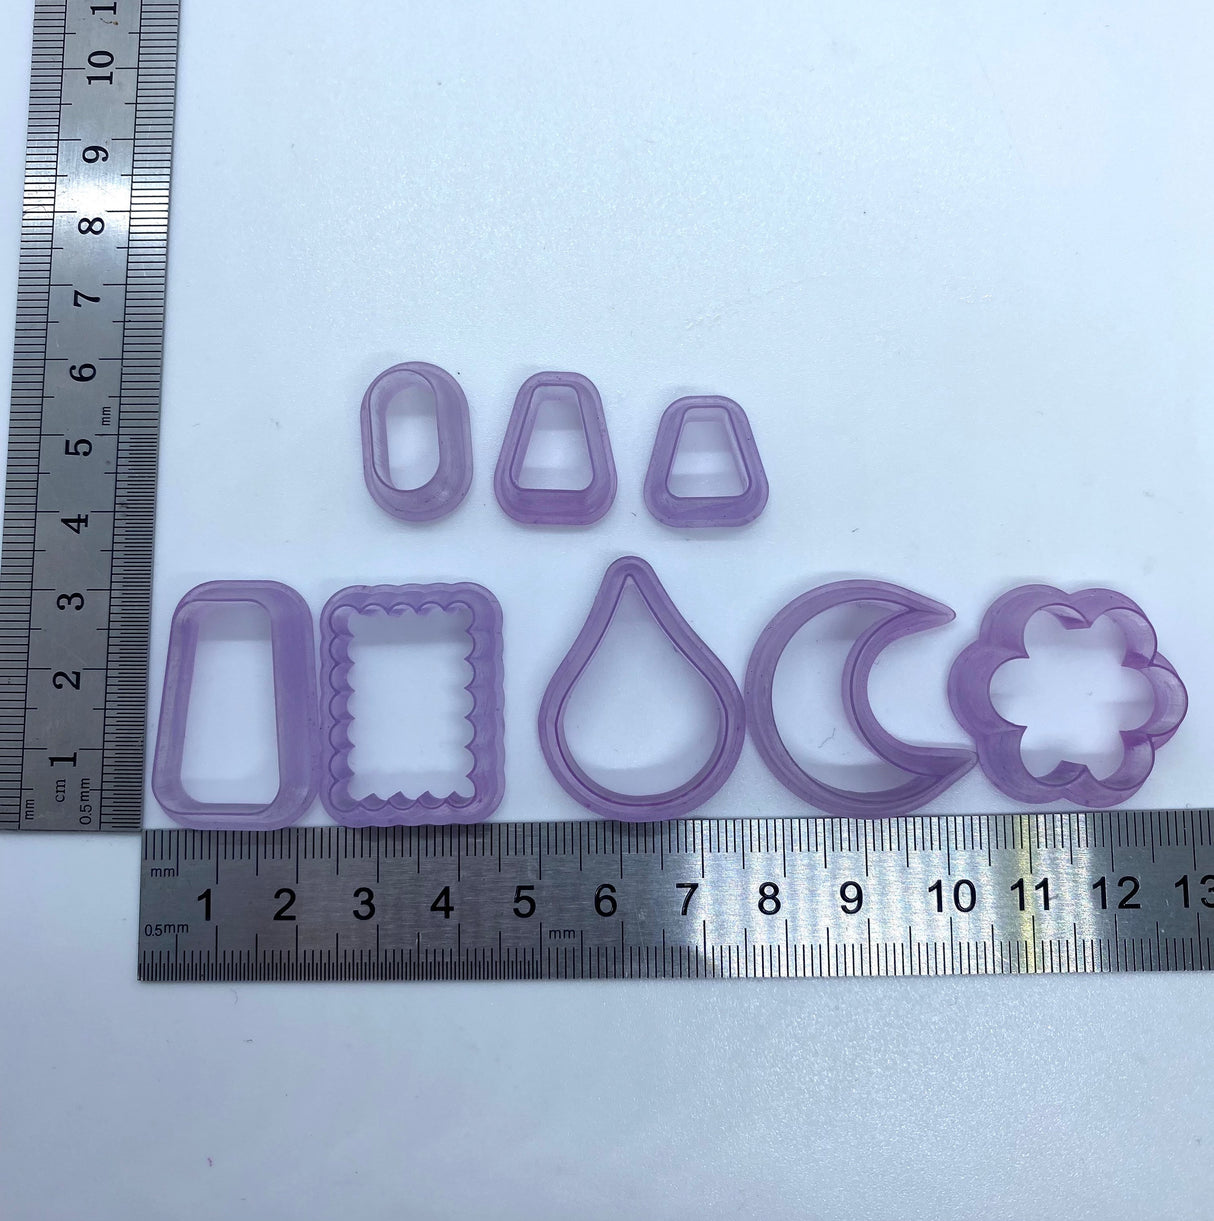 Resin polymer clay shape cutters, Gilly cutters (Kita MK i) precious metal, ceramic clay cutters, shapes